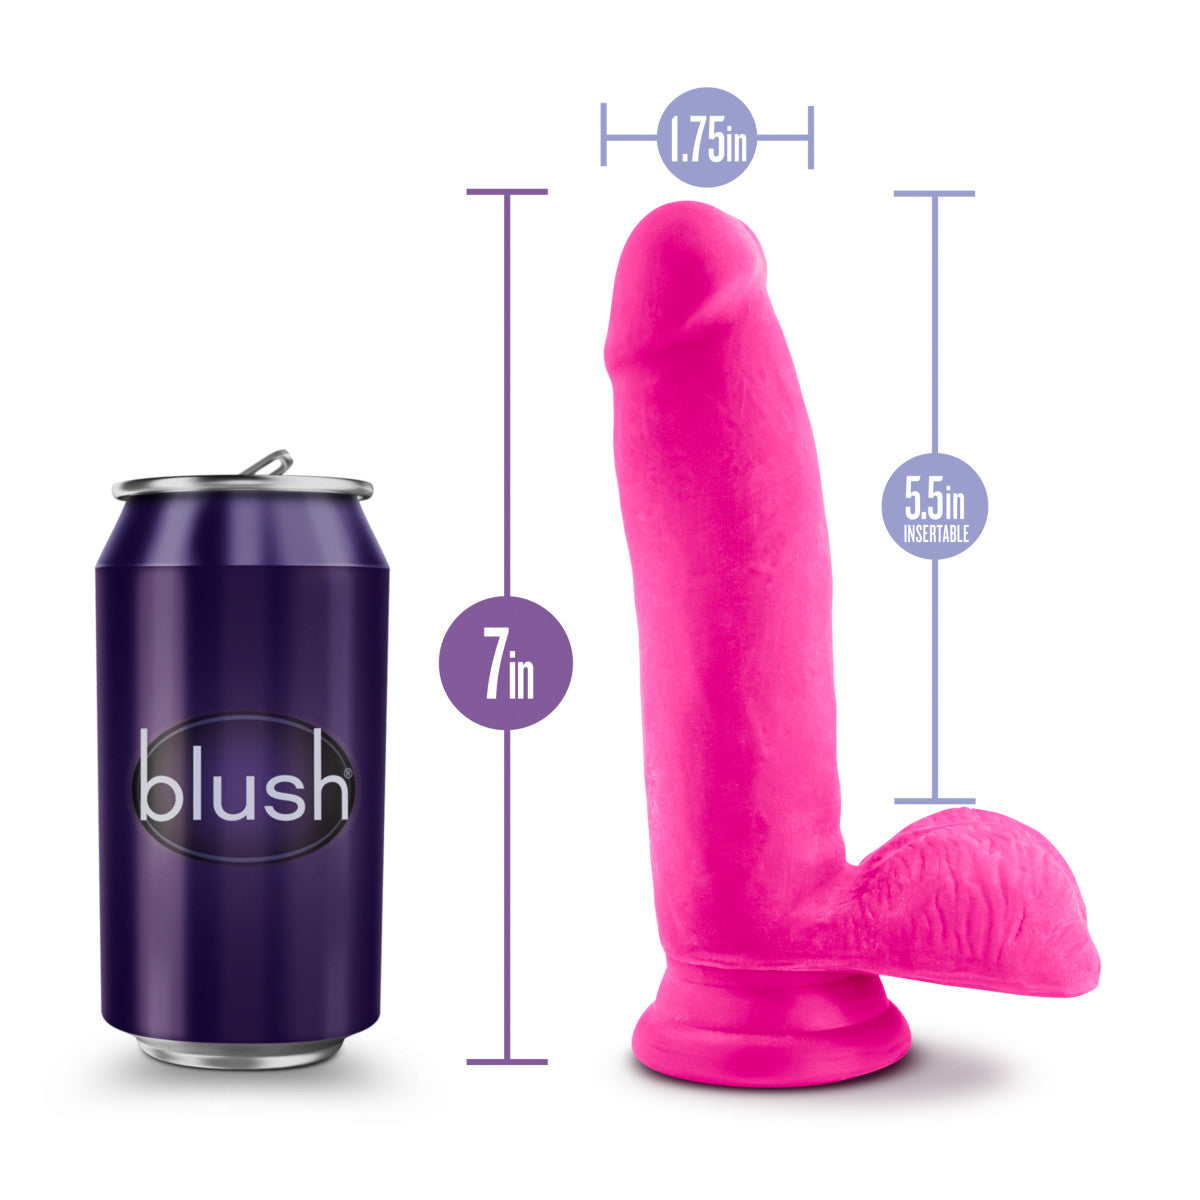 Pink realistic dildo with a small rounded head, veins along a straight but flexible shaft, realistic balls, and a suction cup base. Additional images show alternate angles.